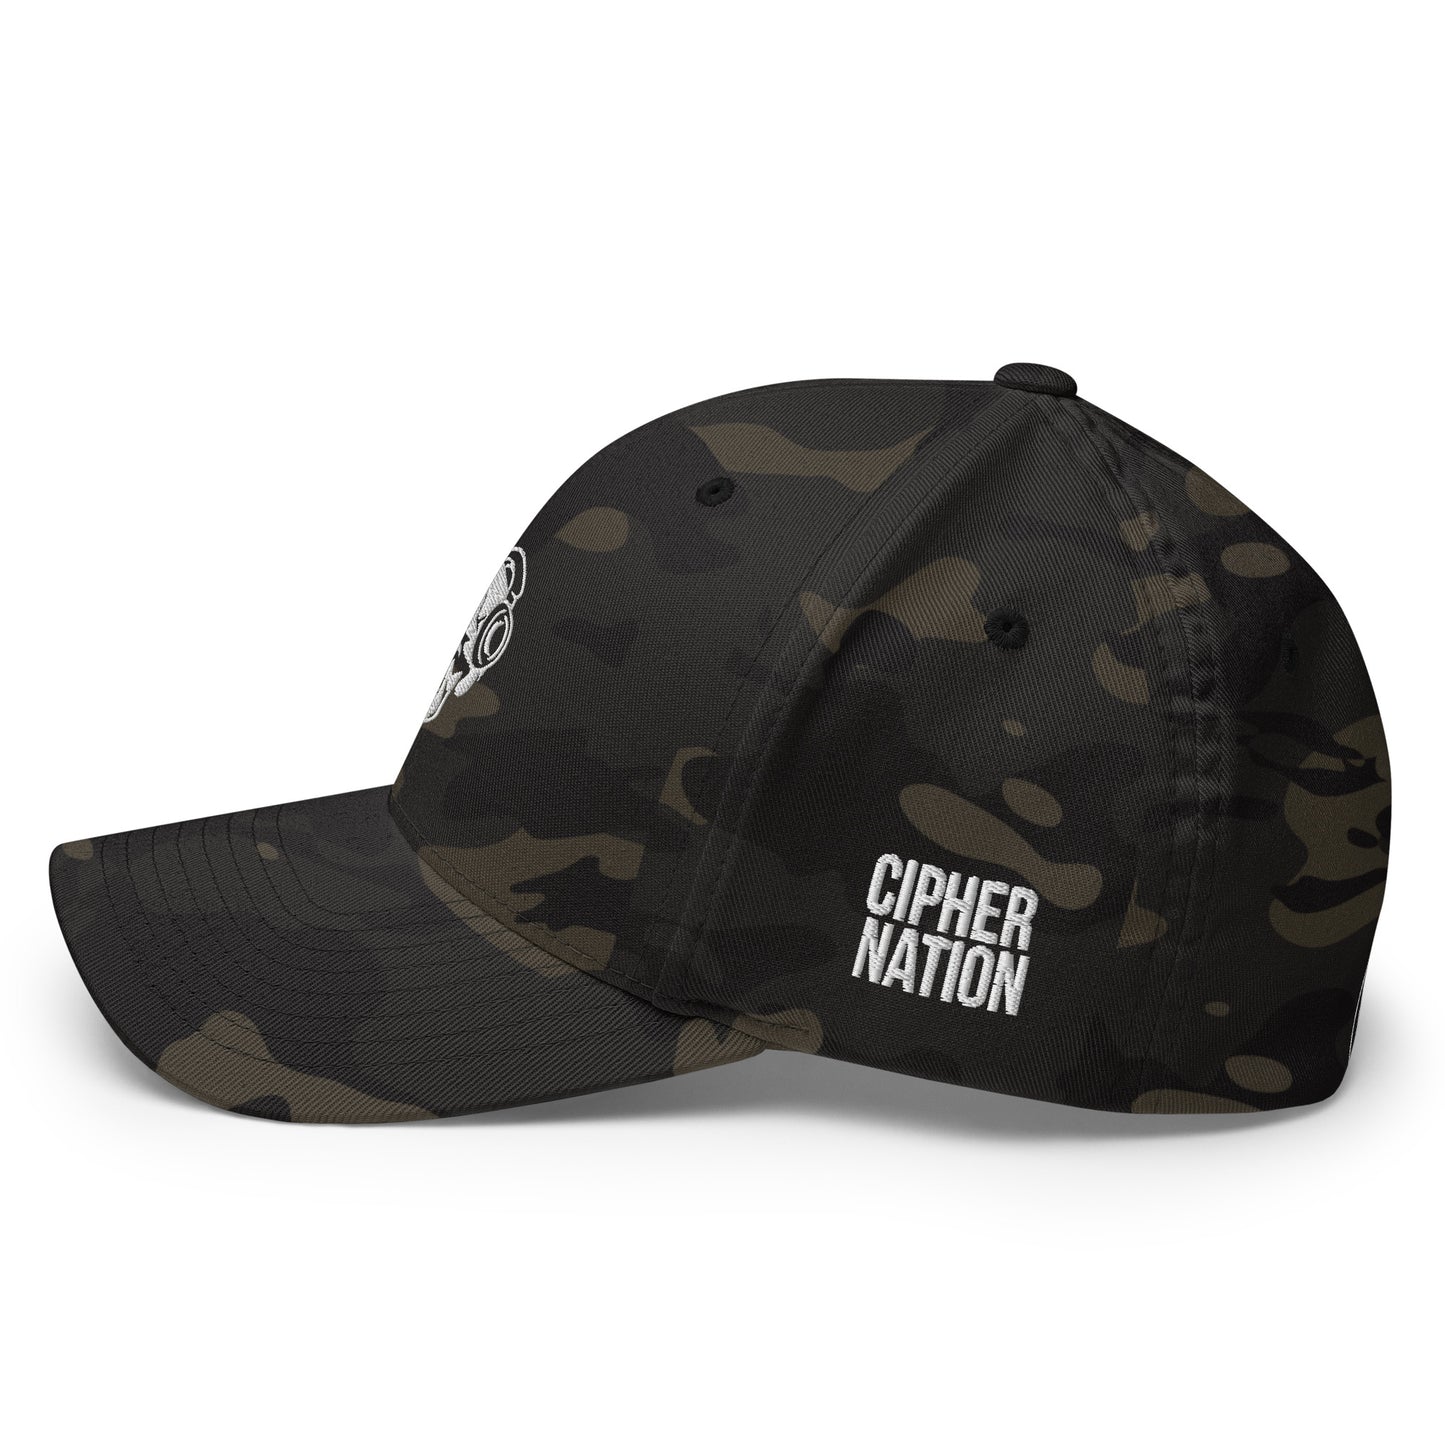 Cipher Nation Structured Twill Cap